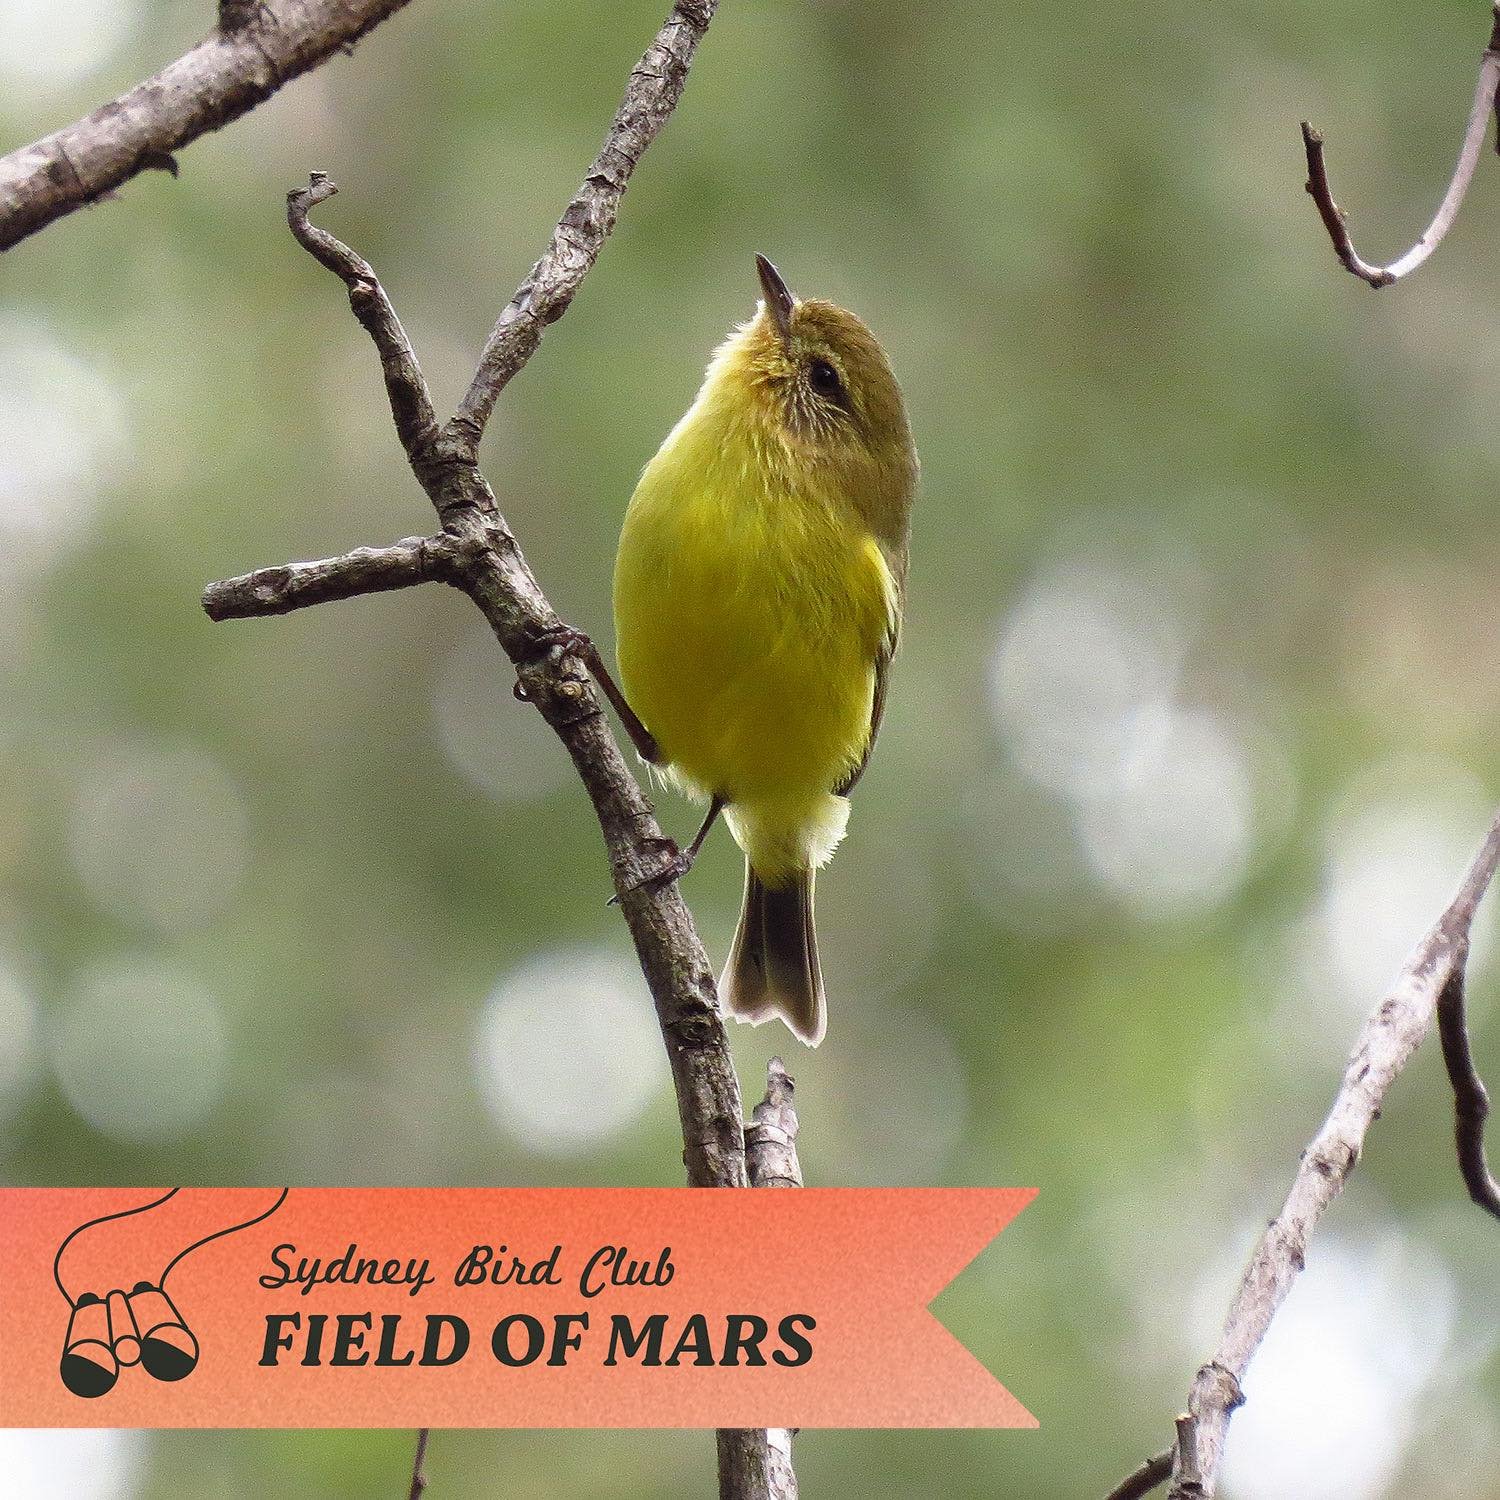 We&rsquo;ll be looking out for this bright little bird, the Yellow Thornbill at Field of Mars next weekend ✨

These tiny birds can be seen darting in and out of the trees toward the canopy and while sometimes difficult to spot, they&rsquo;re unforget